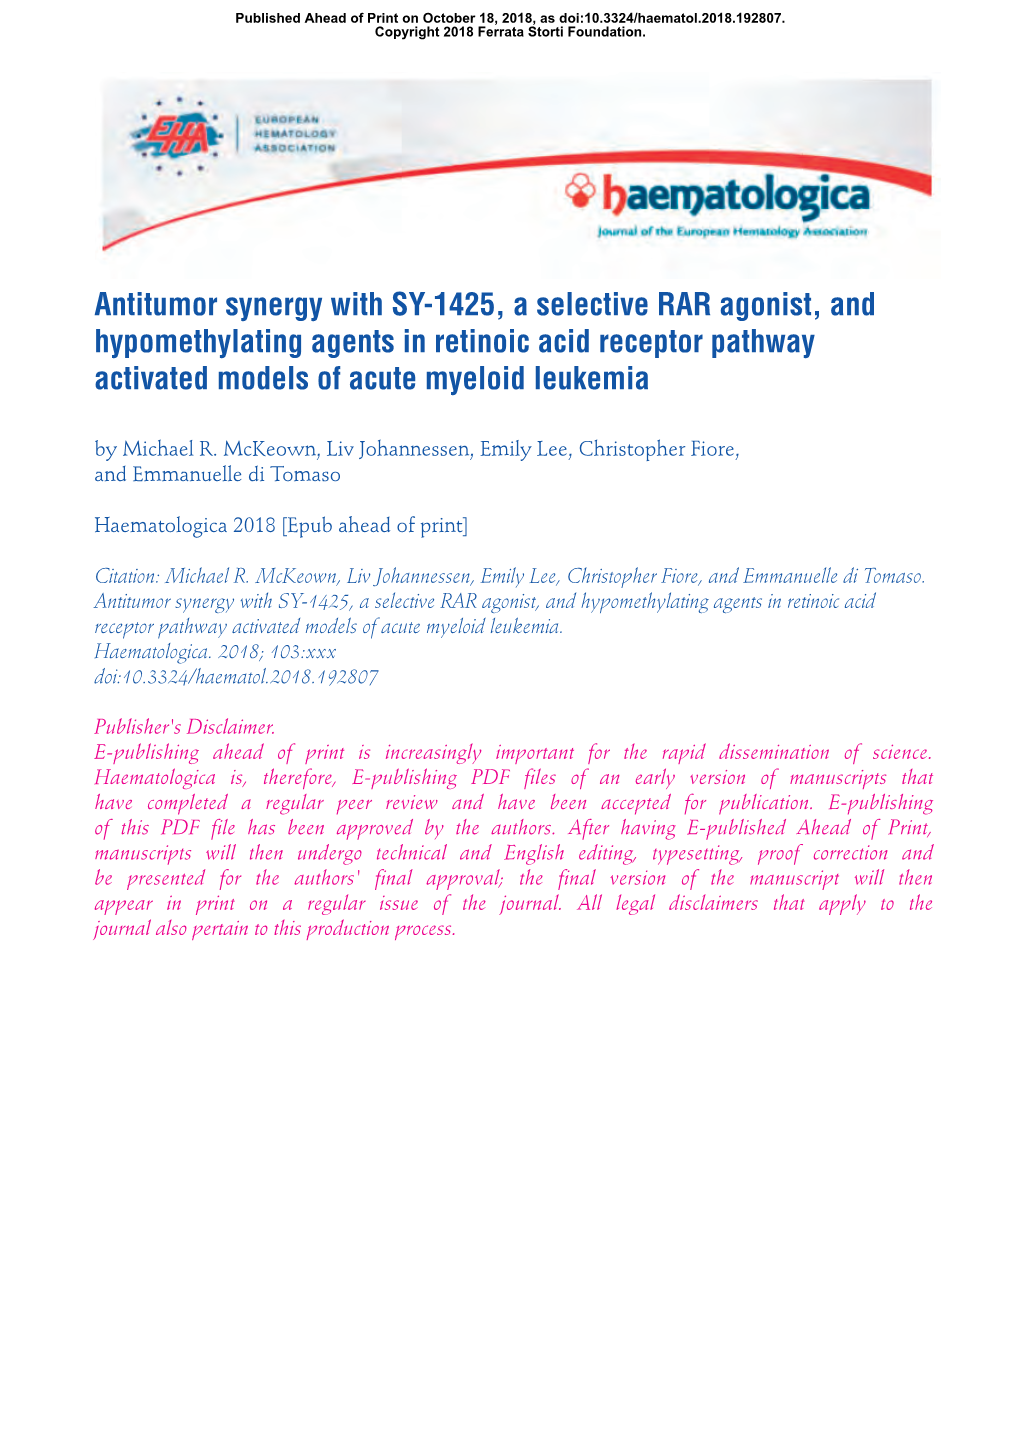 Antitumor Synergy with SY-1425, a Selective RAR Agonist, And